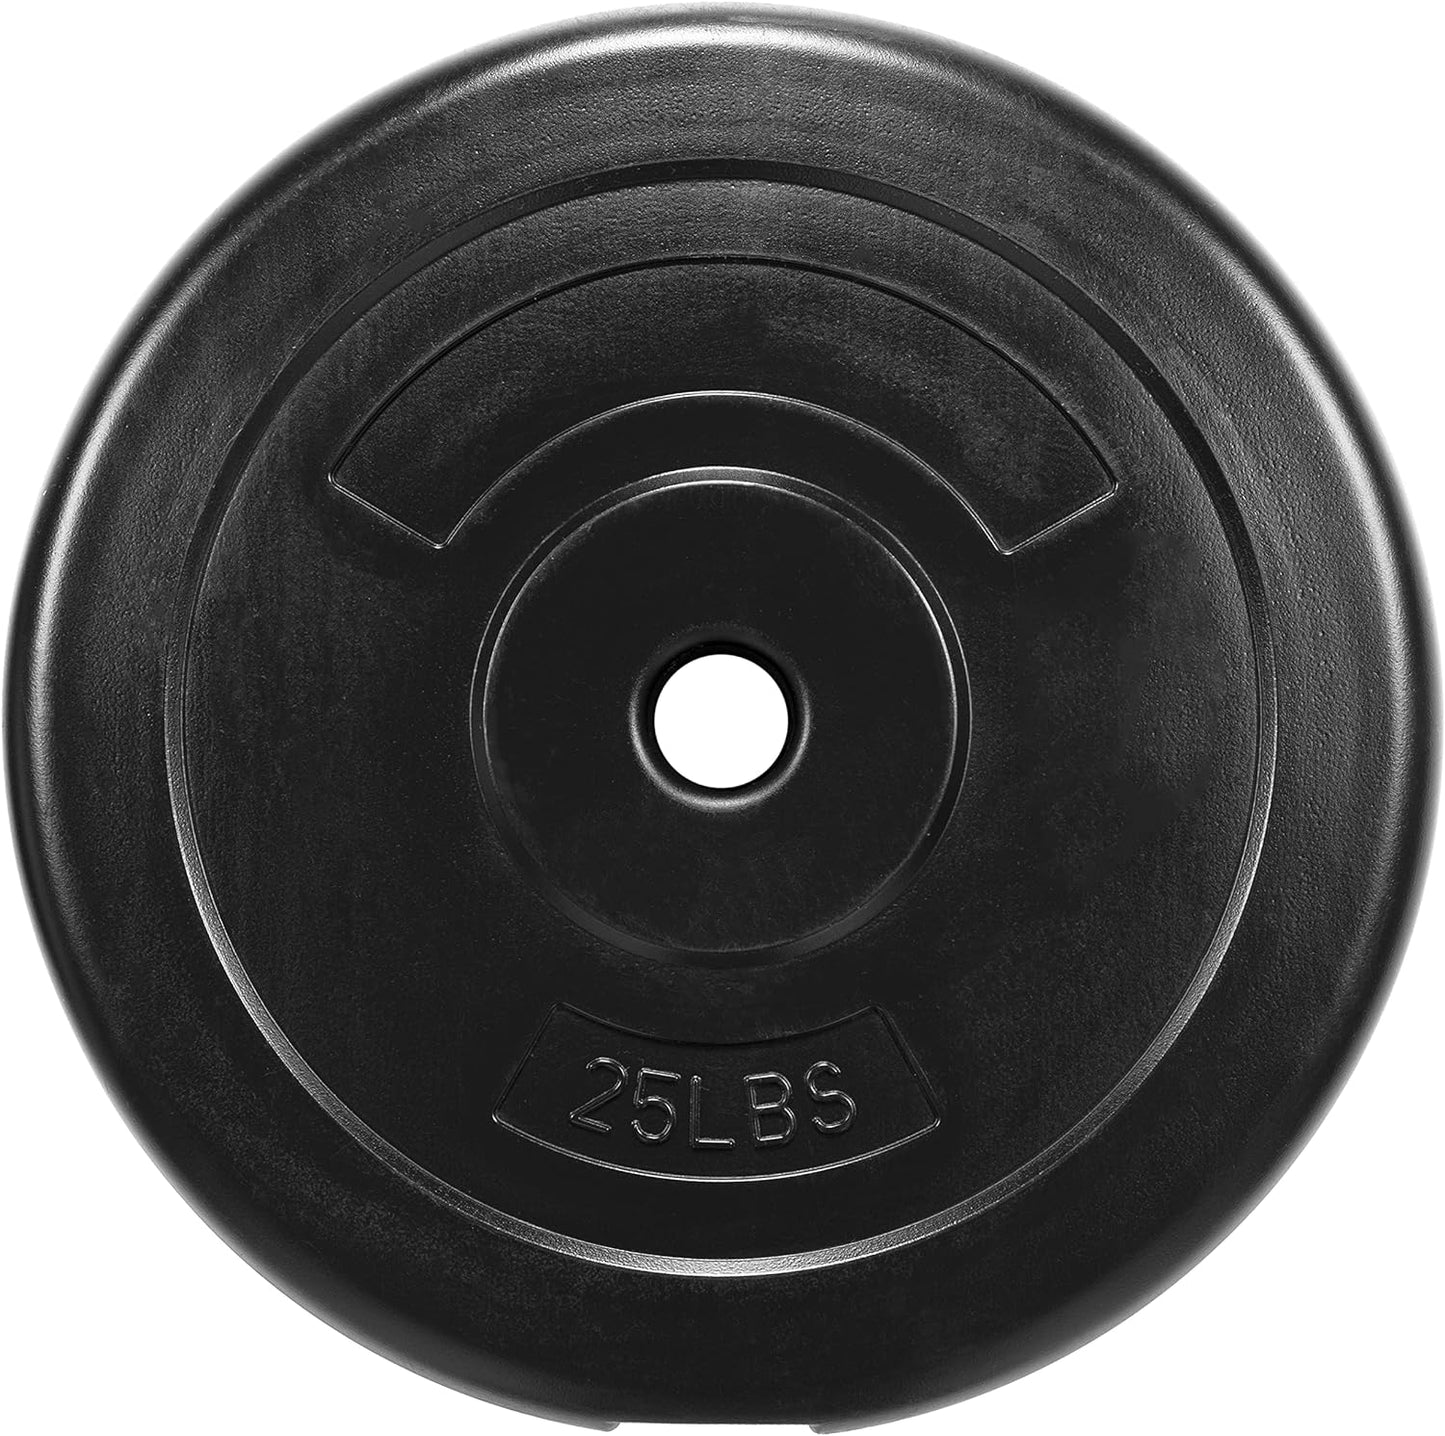 Signature Fitness Vinyl Standard 1-Inch Plate Weight Plate for Strength Training and Weightlifting, Pairs or Sets